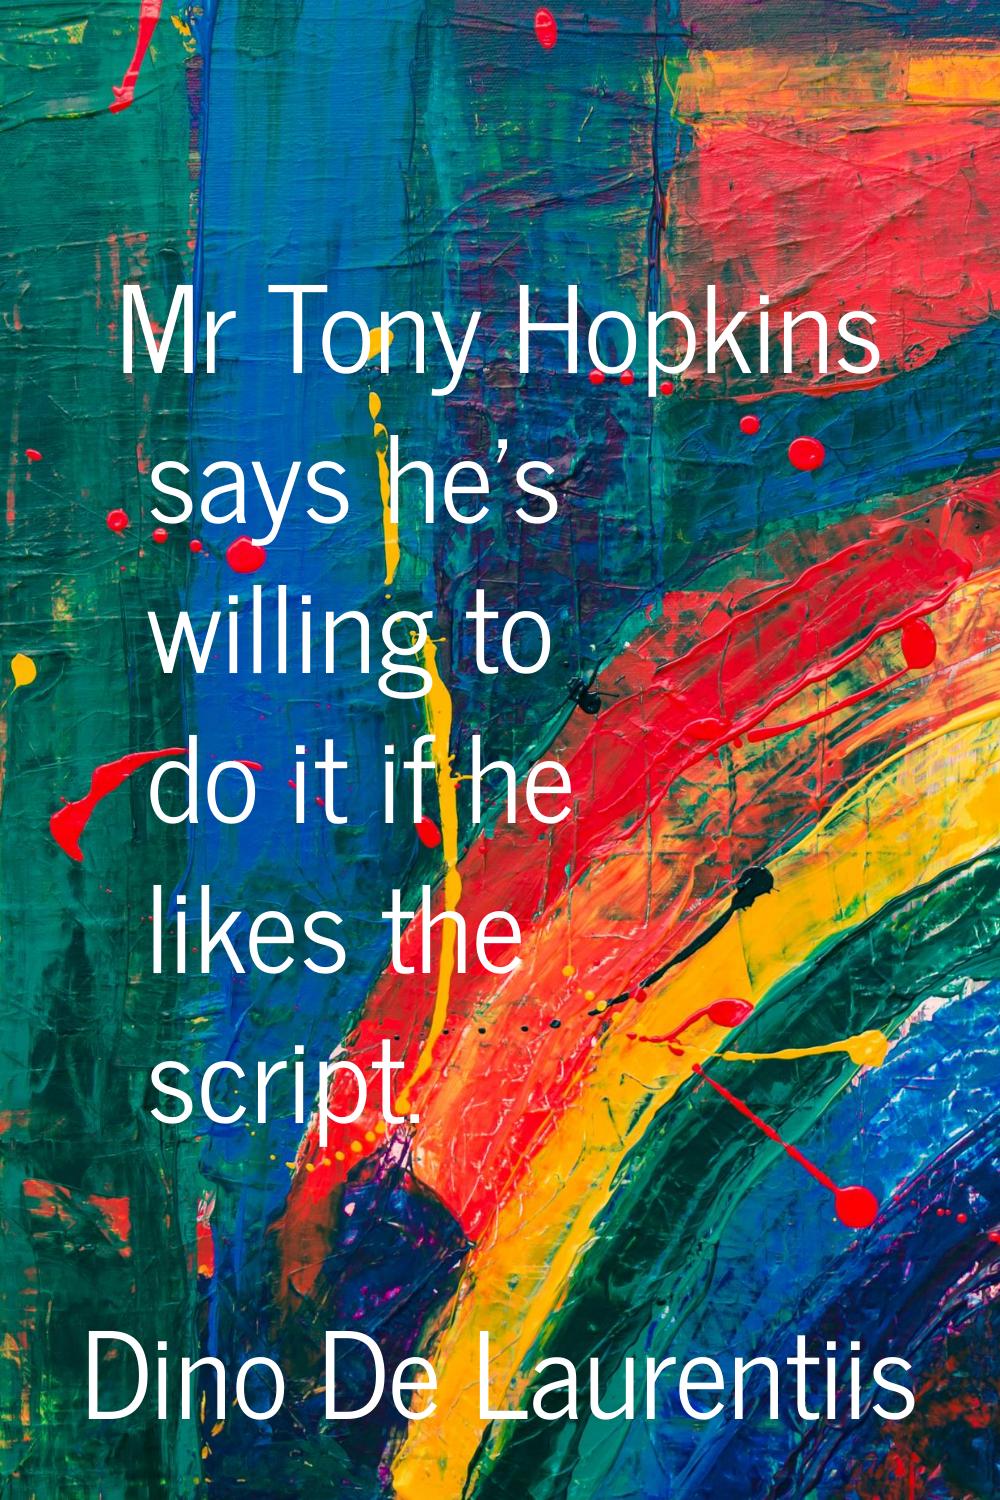 Mr Tony Hopkins says he's willing to do it if he likes the script.